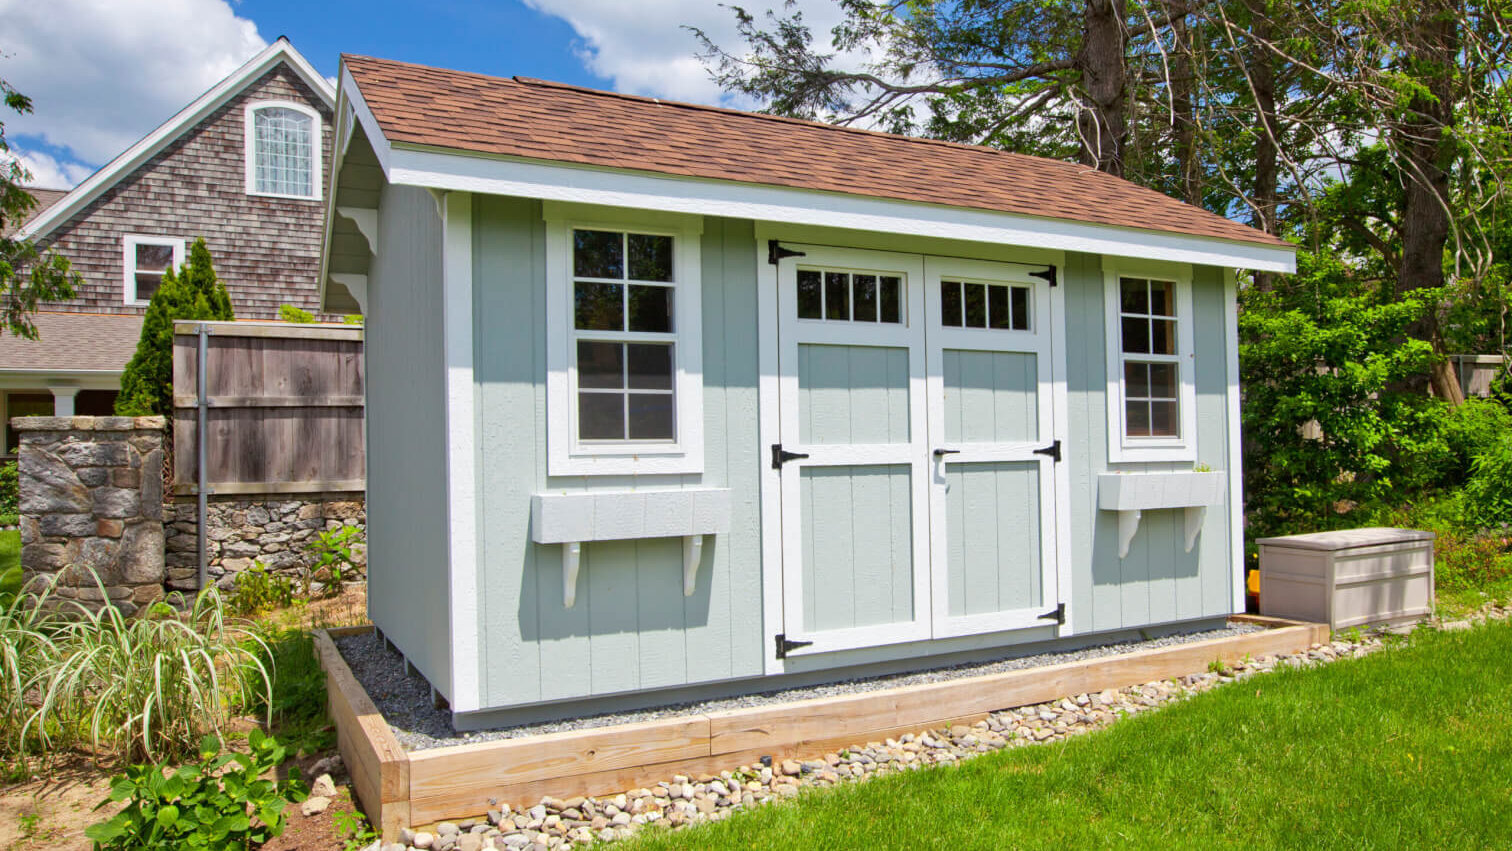 Best Storage Shed According to Experts